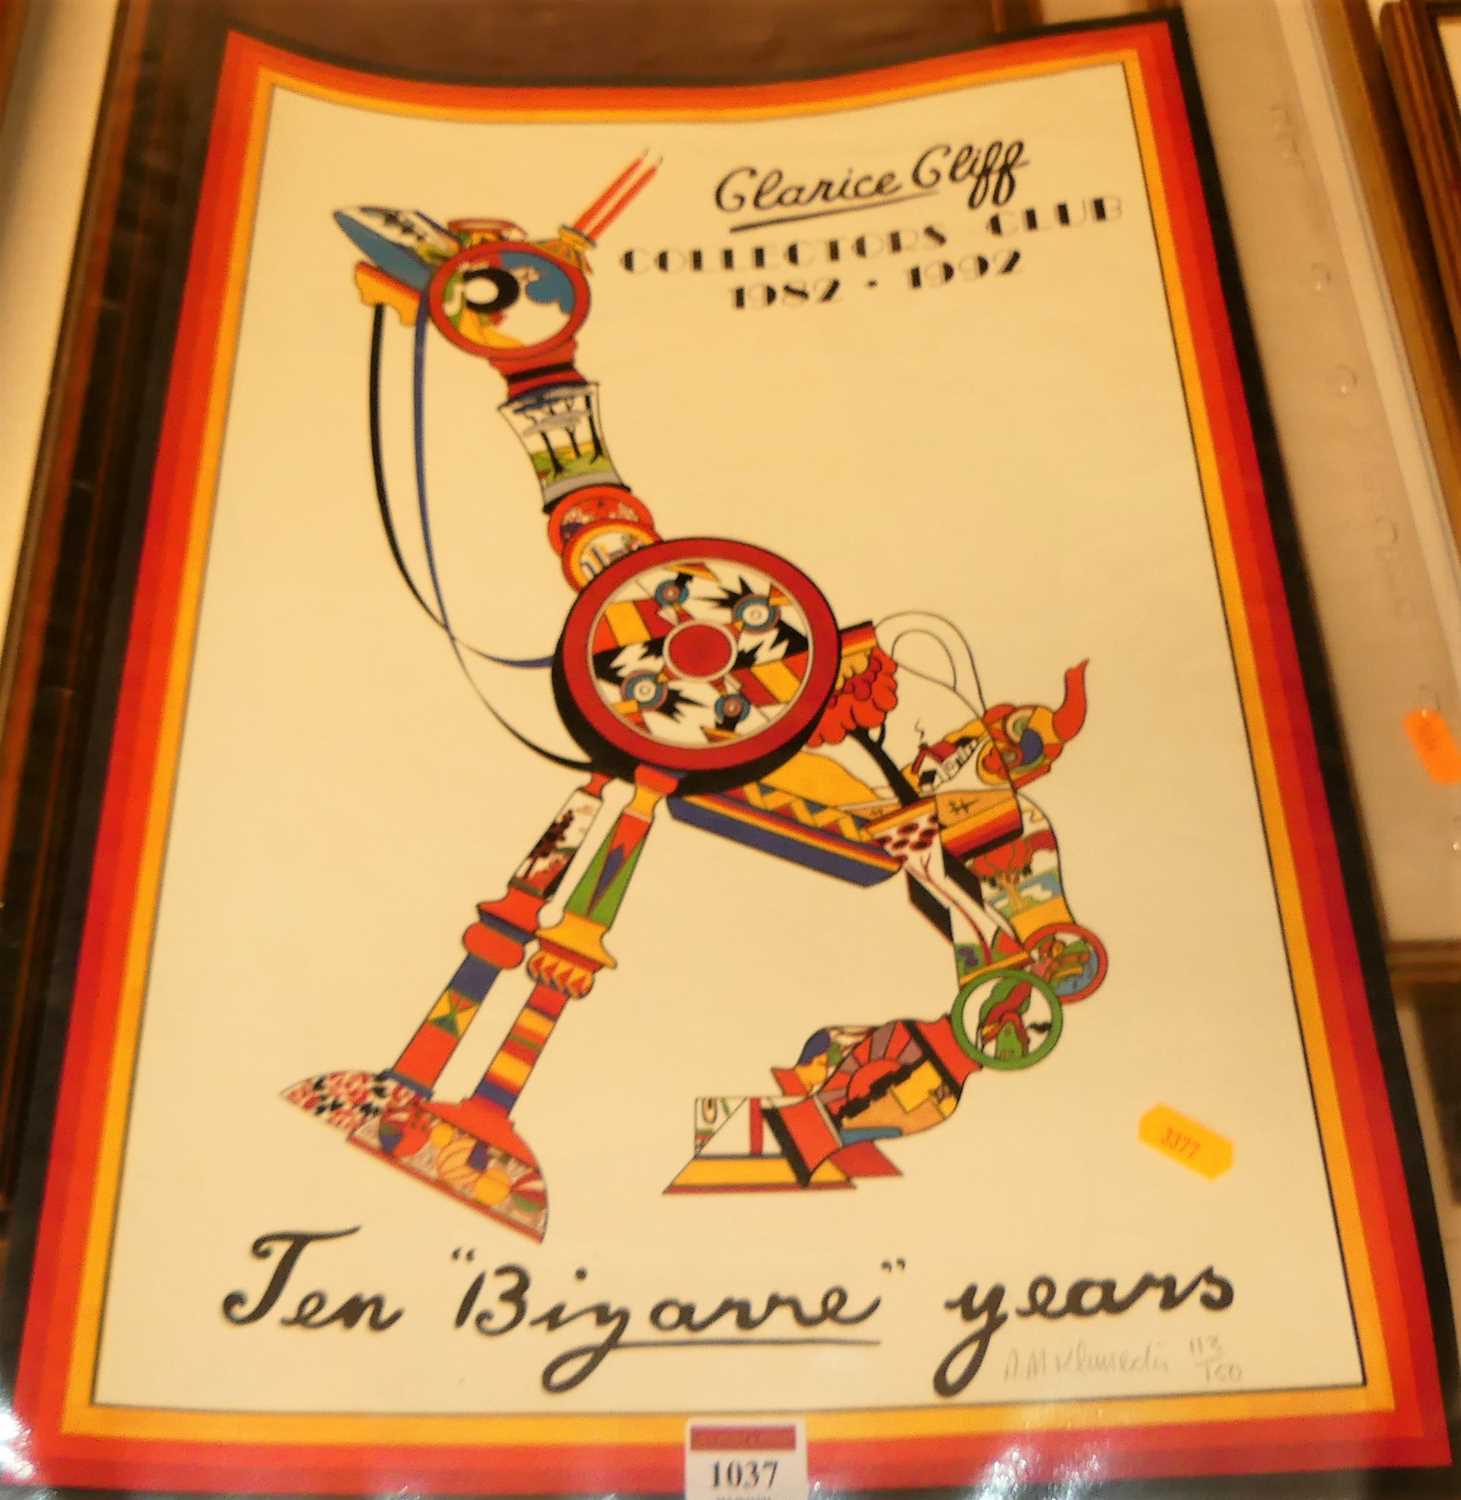 AM Kluneda - Ten Bizarre Years, Clarice Cliff Collectors Club poster, signed and numbered in